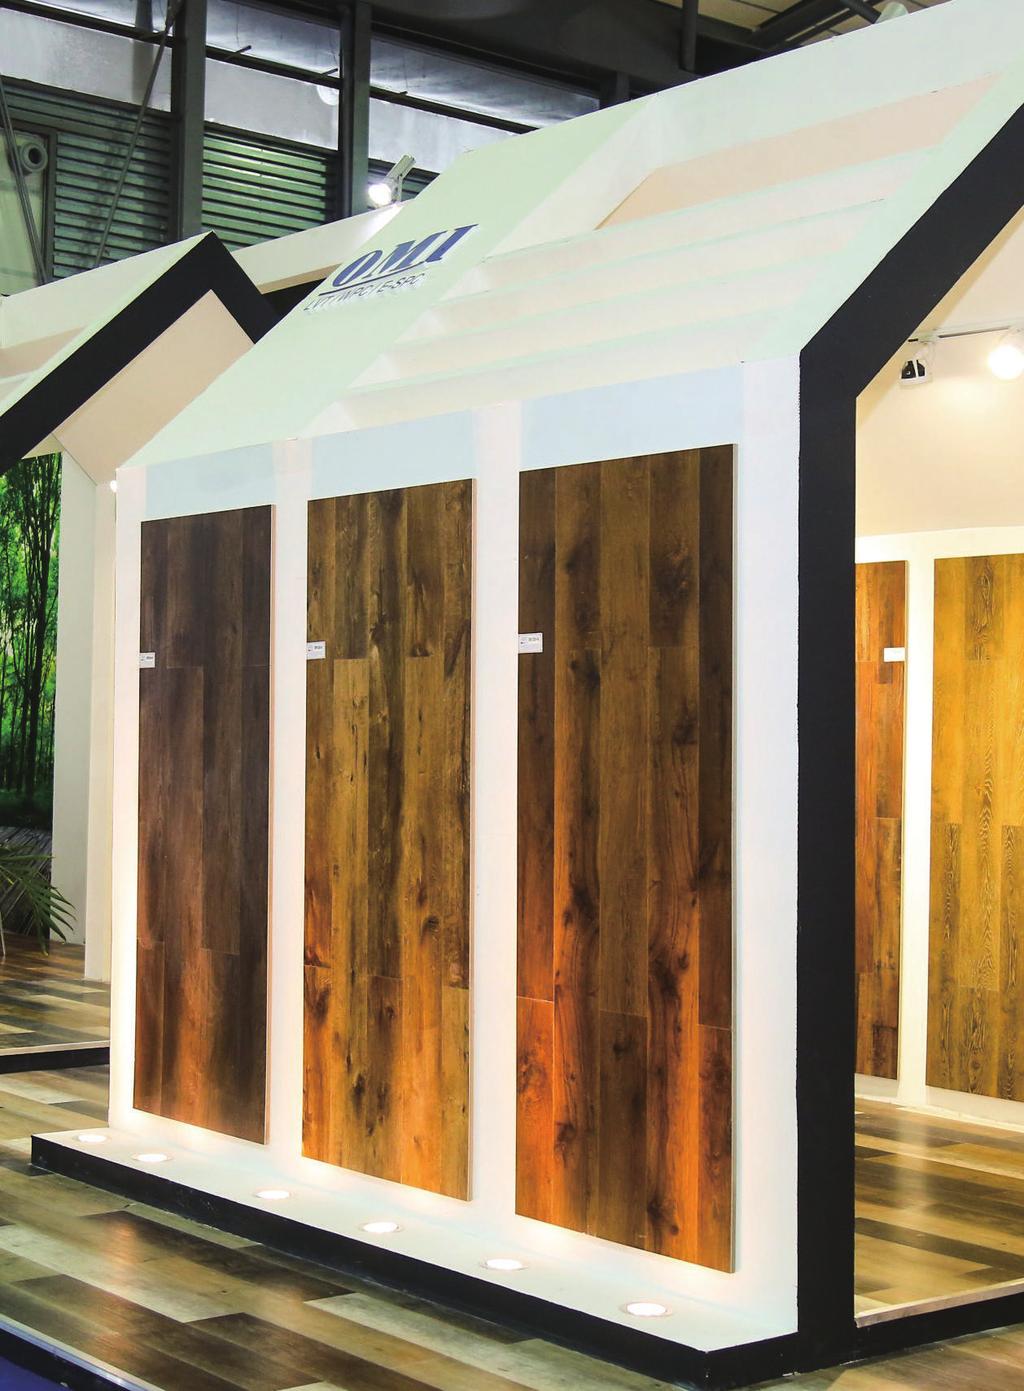 As an international professional flooring business platform, DOMOTEX asia/chinafloor is building a bridge of communication between exhibitors and visitors.